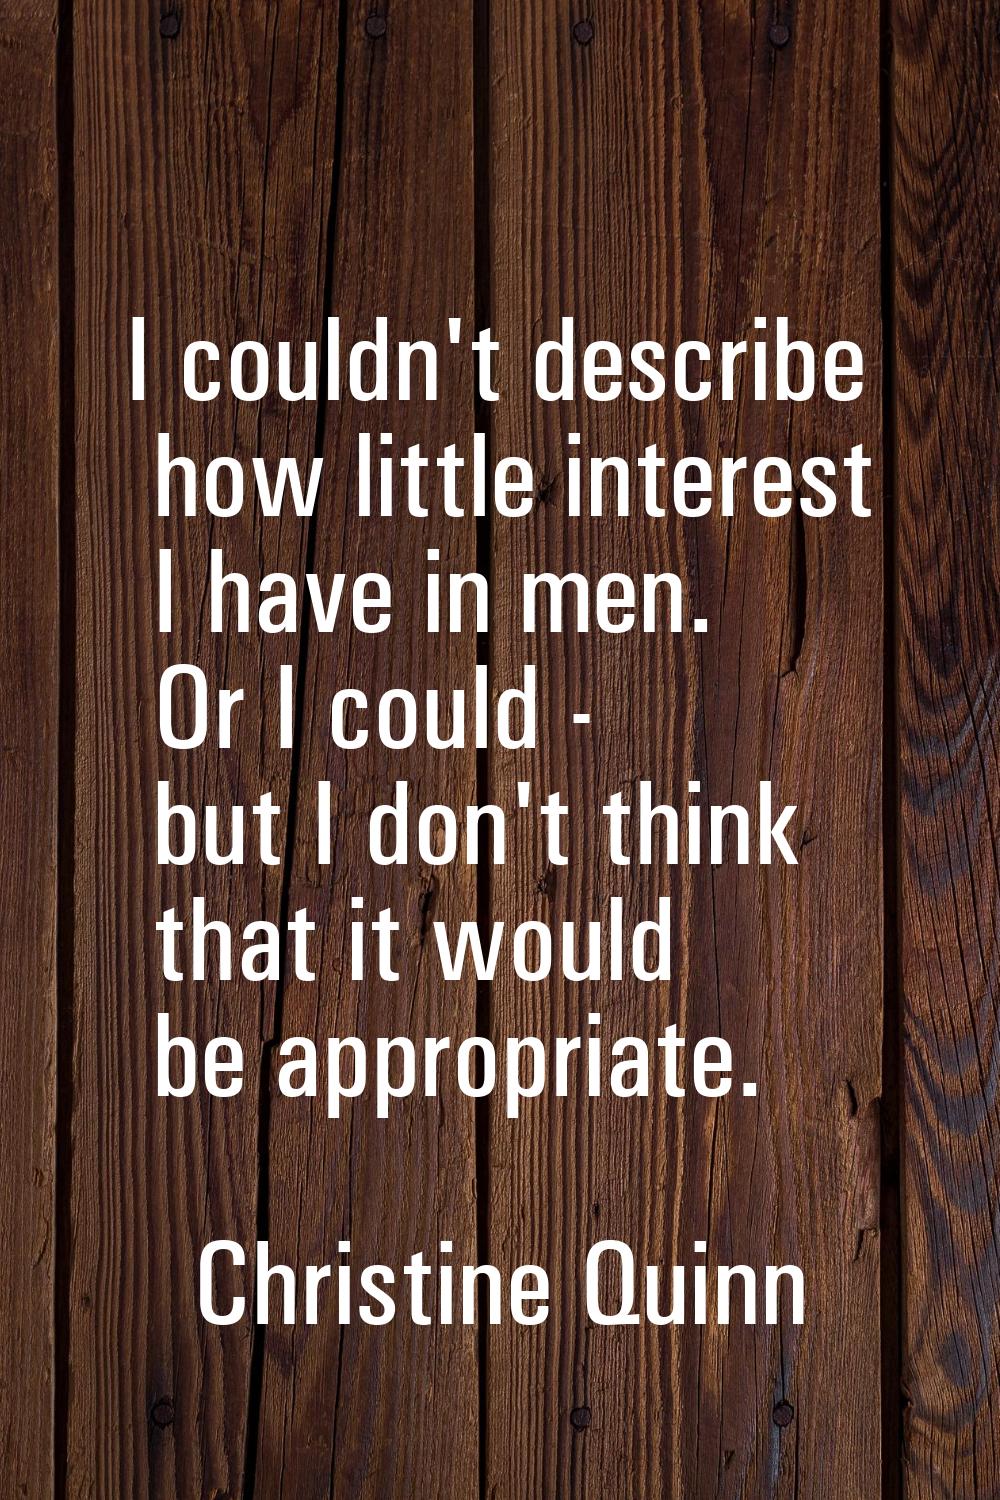 I couldn't describe how little interest I have in men. Or I could - but I don't think that it would